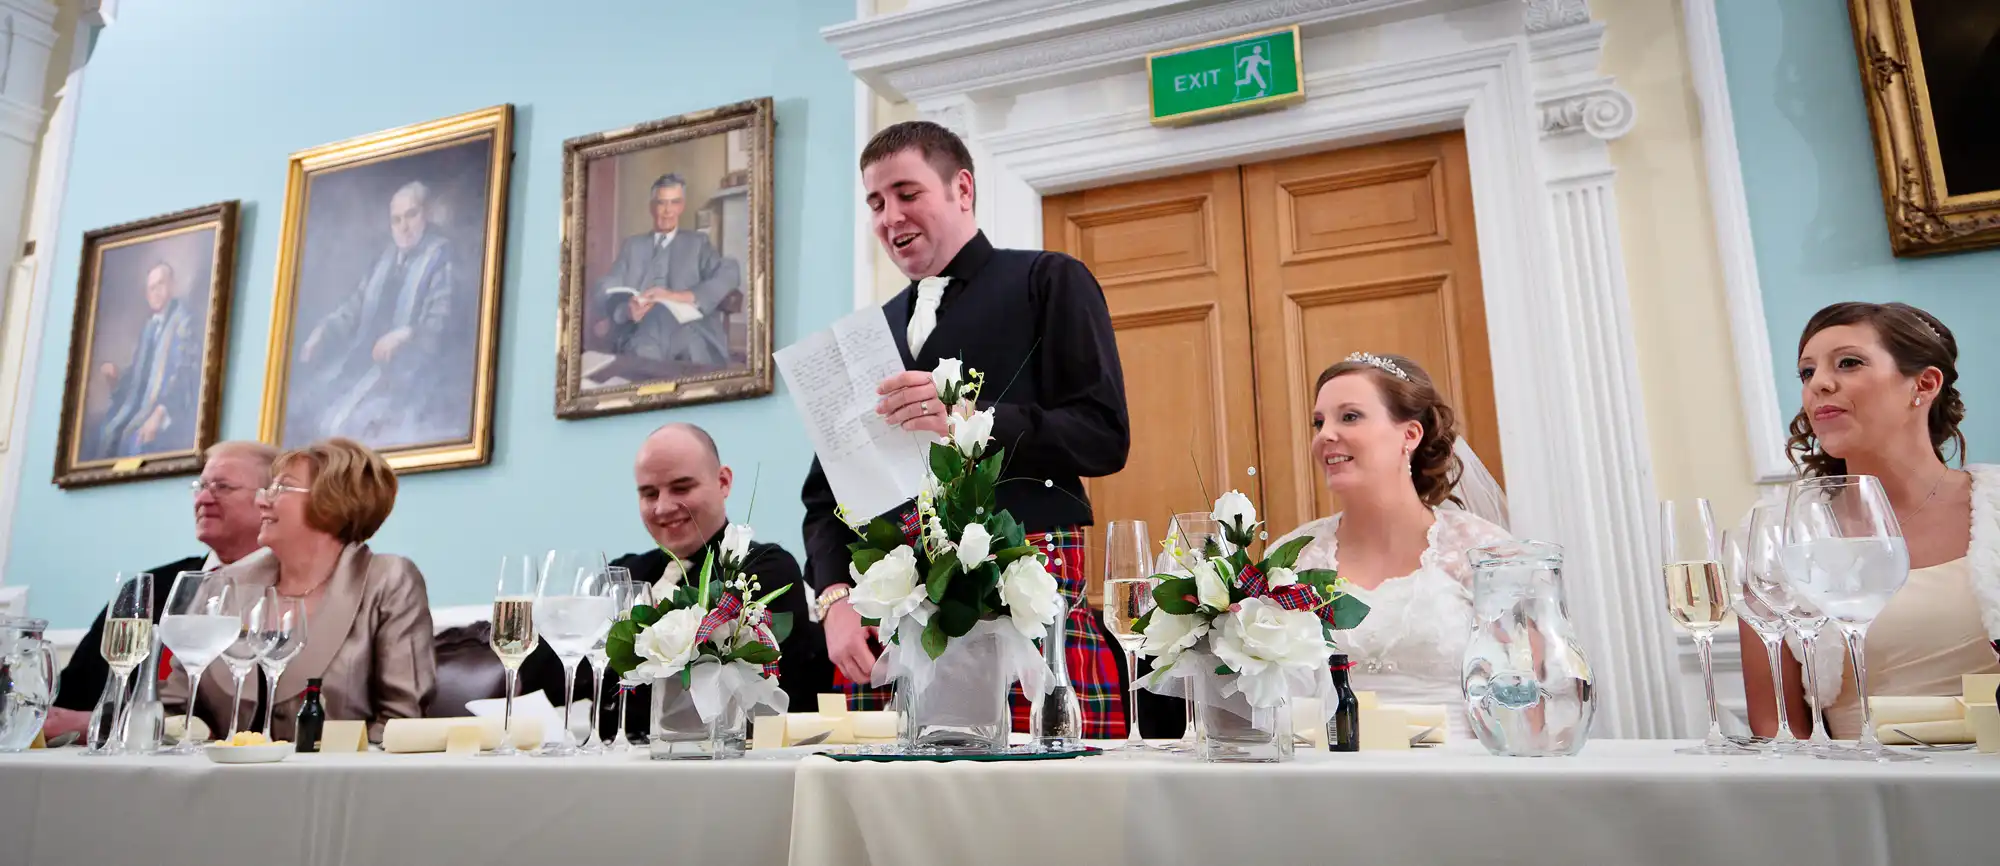 A man standing and giving a speech at a wedding reception table, with guests seated around listening, in a room with portraits on the walls.